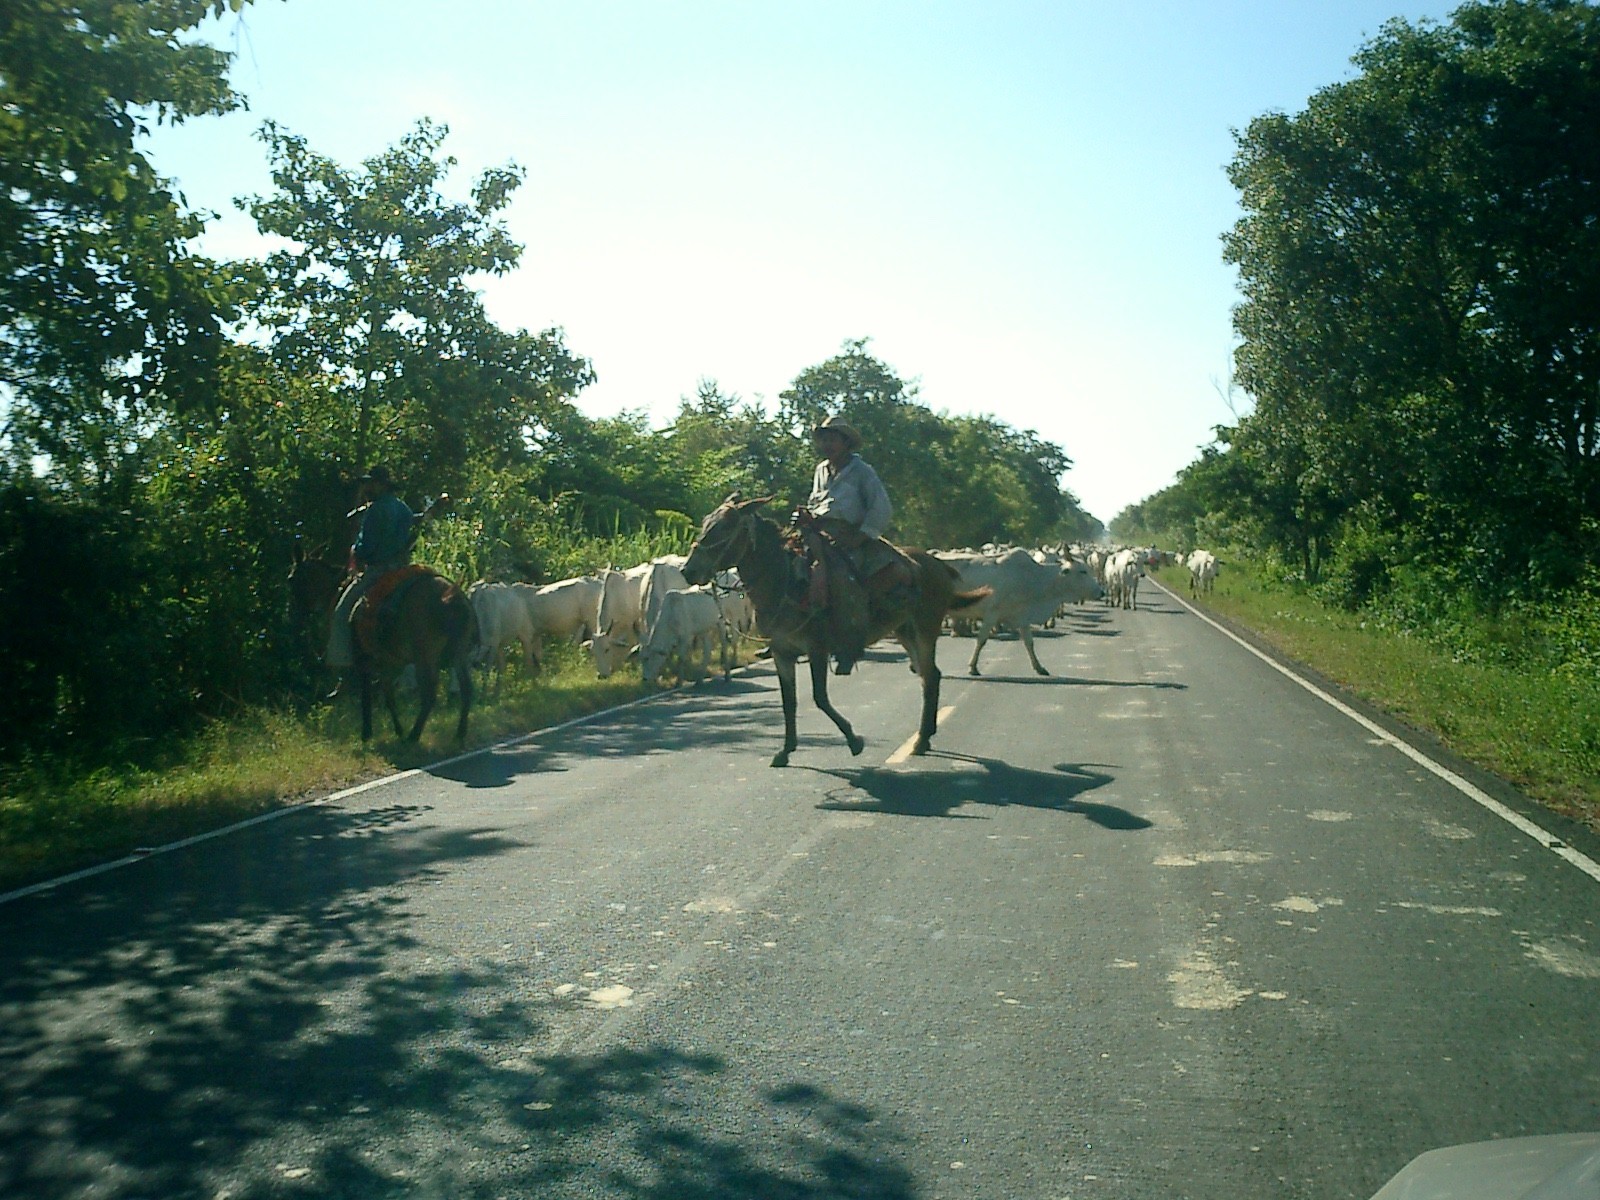 Pantaneiros Cowboys moving their herd of cows from flooded areas to dry land. It took us at least 20 minutes to drive through the herd.